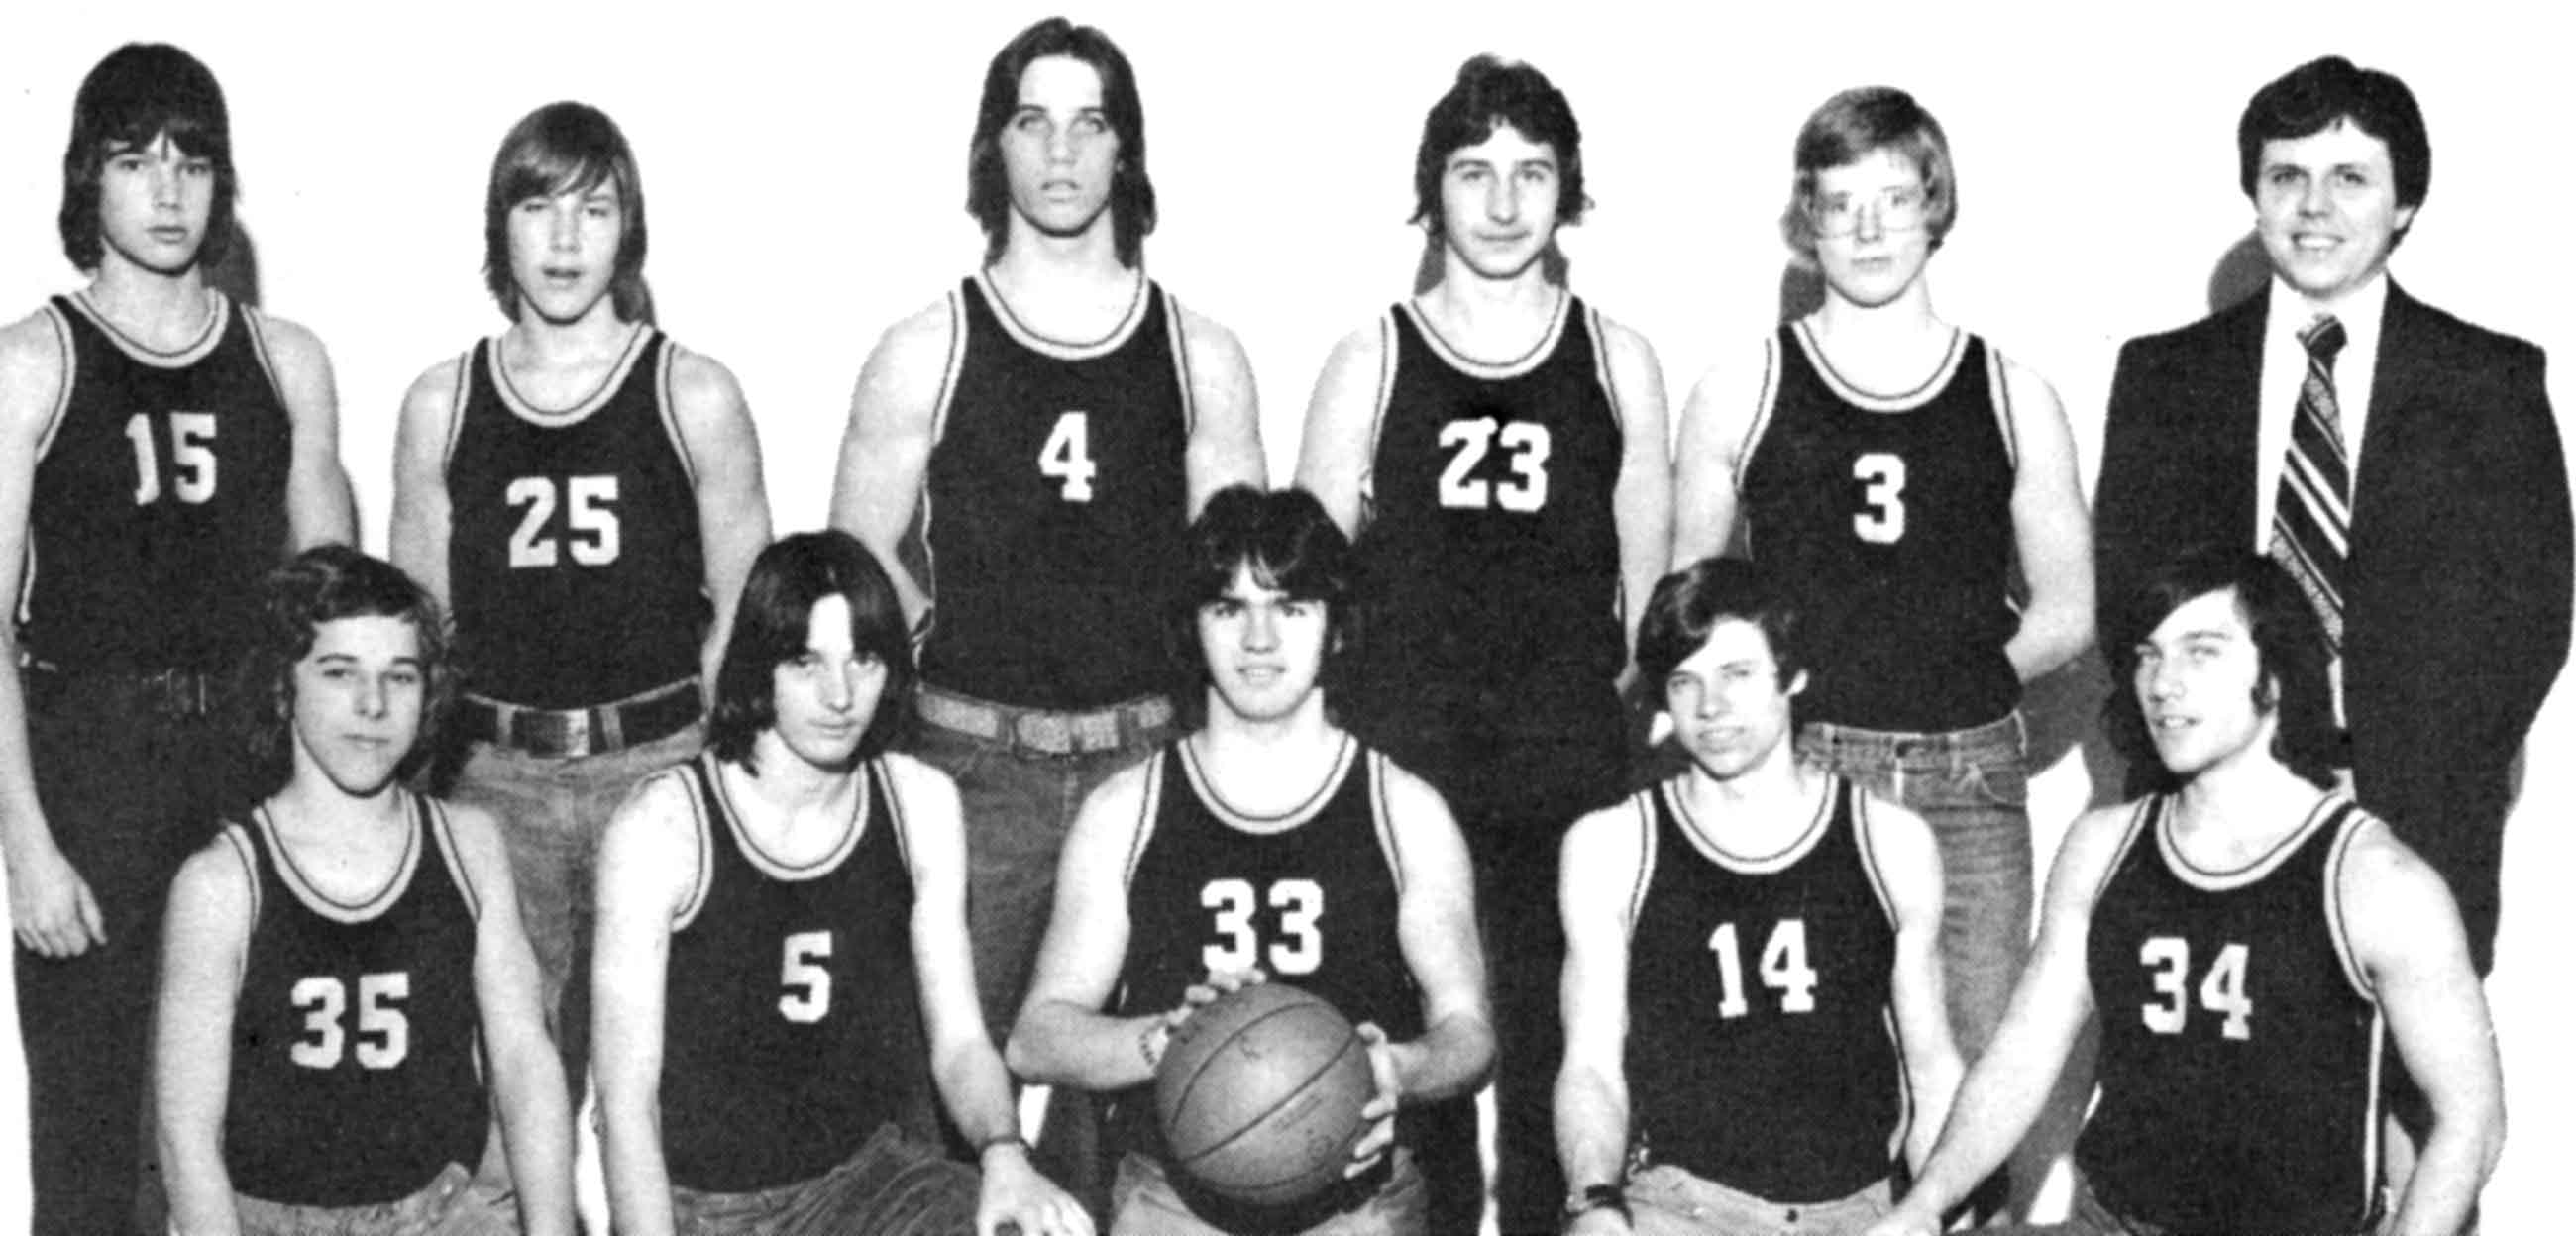 (Click to magnify) FRONT ROW: Rick Sauder, G. Nickolson, Drew Cleland, Tom Armstrong, Mark Gloven; ***BACK ROW: Peter Gouweleeuw, Scott Jorden, J. Noble, Peter Delic, S. Knapp, Mr. Brian Manorek (coach). Assuming this order - not explicitly location capti